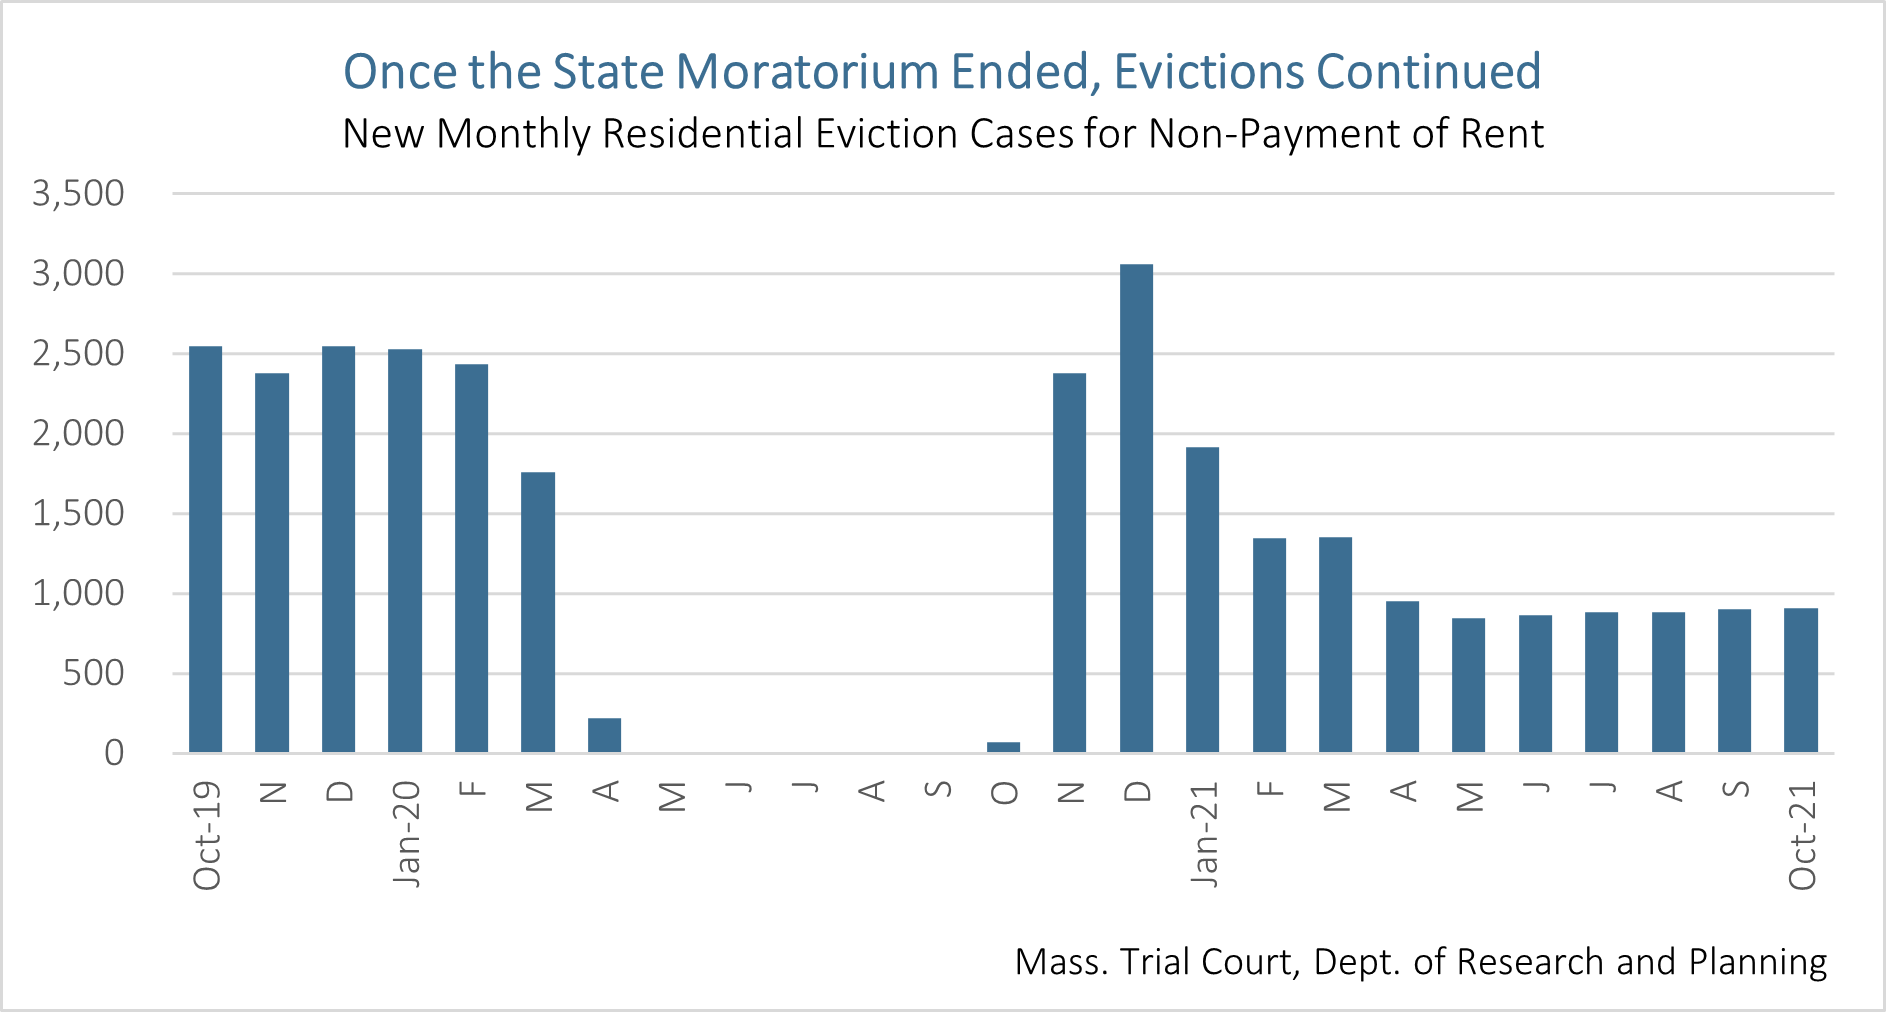 Bar chart: Once the State Moratorium Ended, Evictions Continued - New monthly residential eviction cases for non-payment of rent